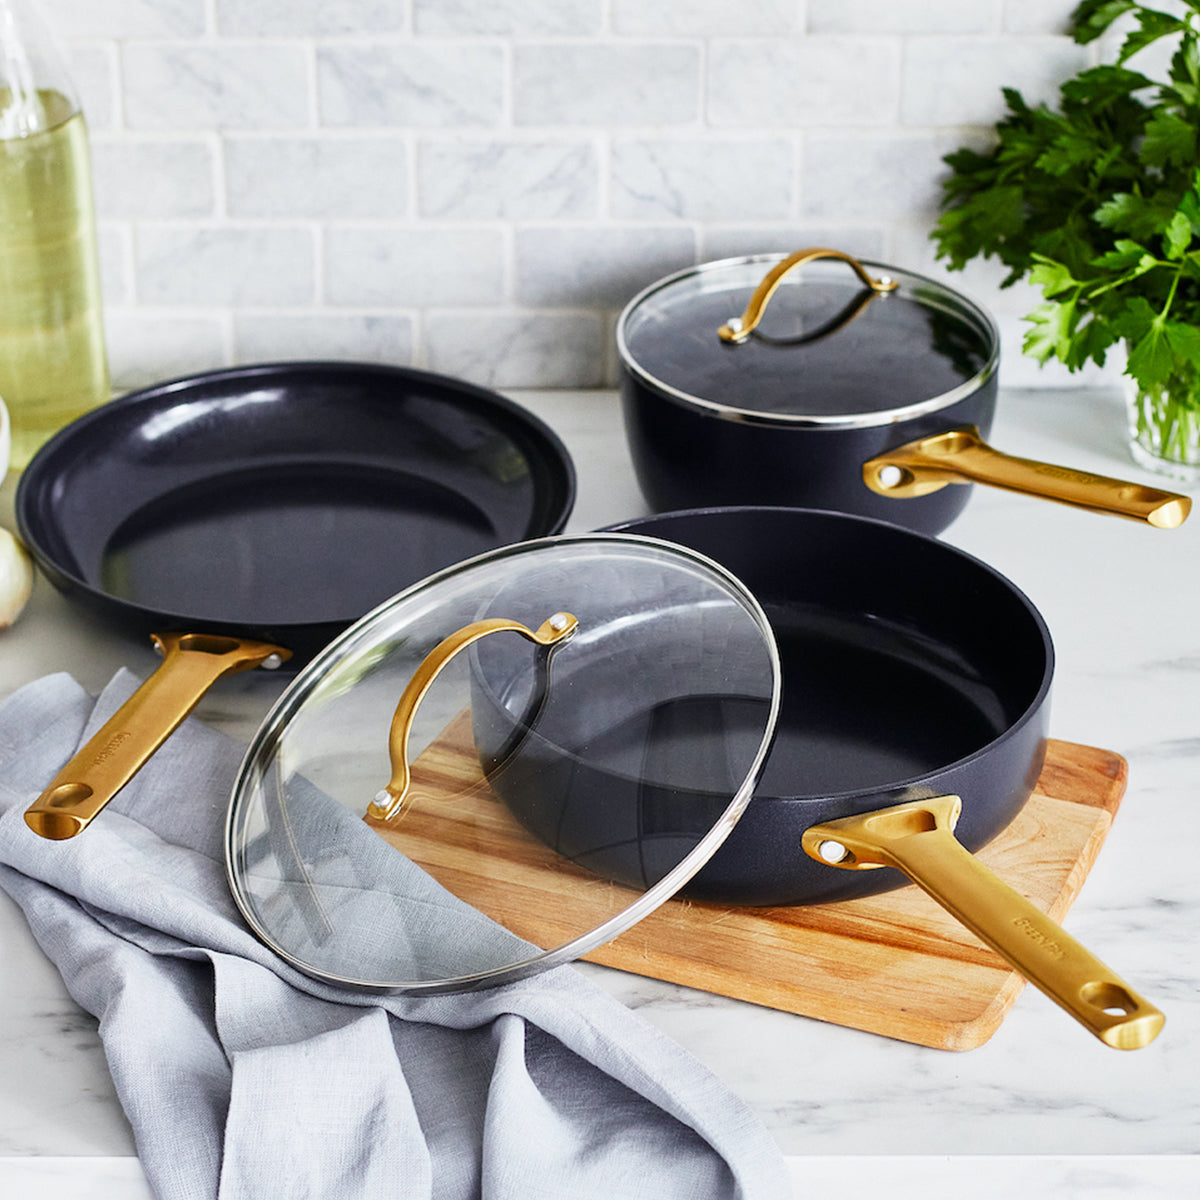 Reserve Ceramic Nonstick 5-Piece Cookware Set, Black with Gold-Tone H